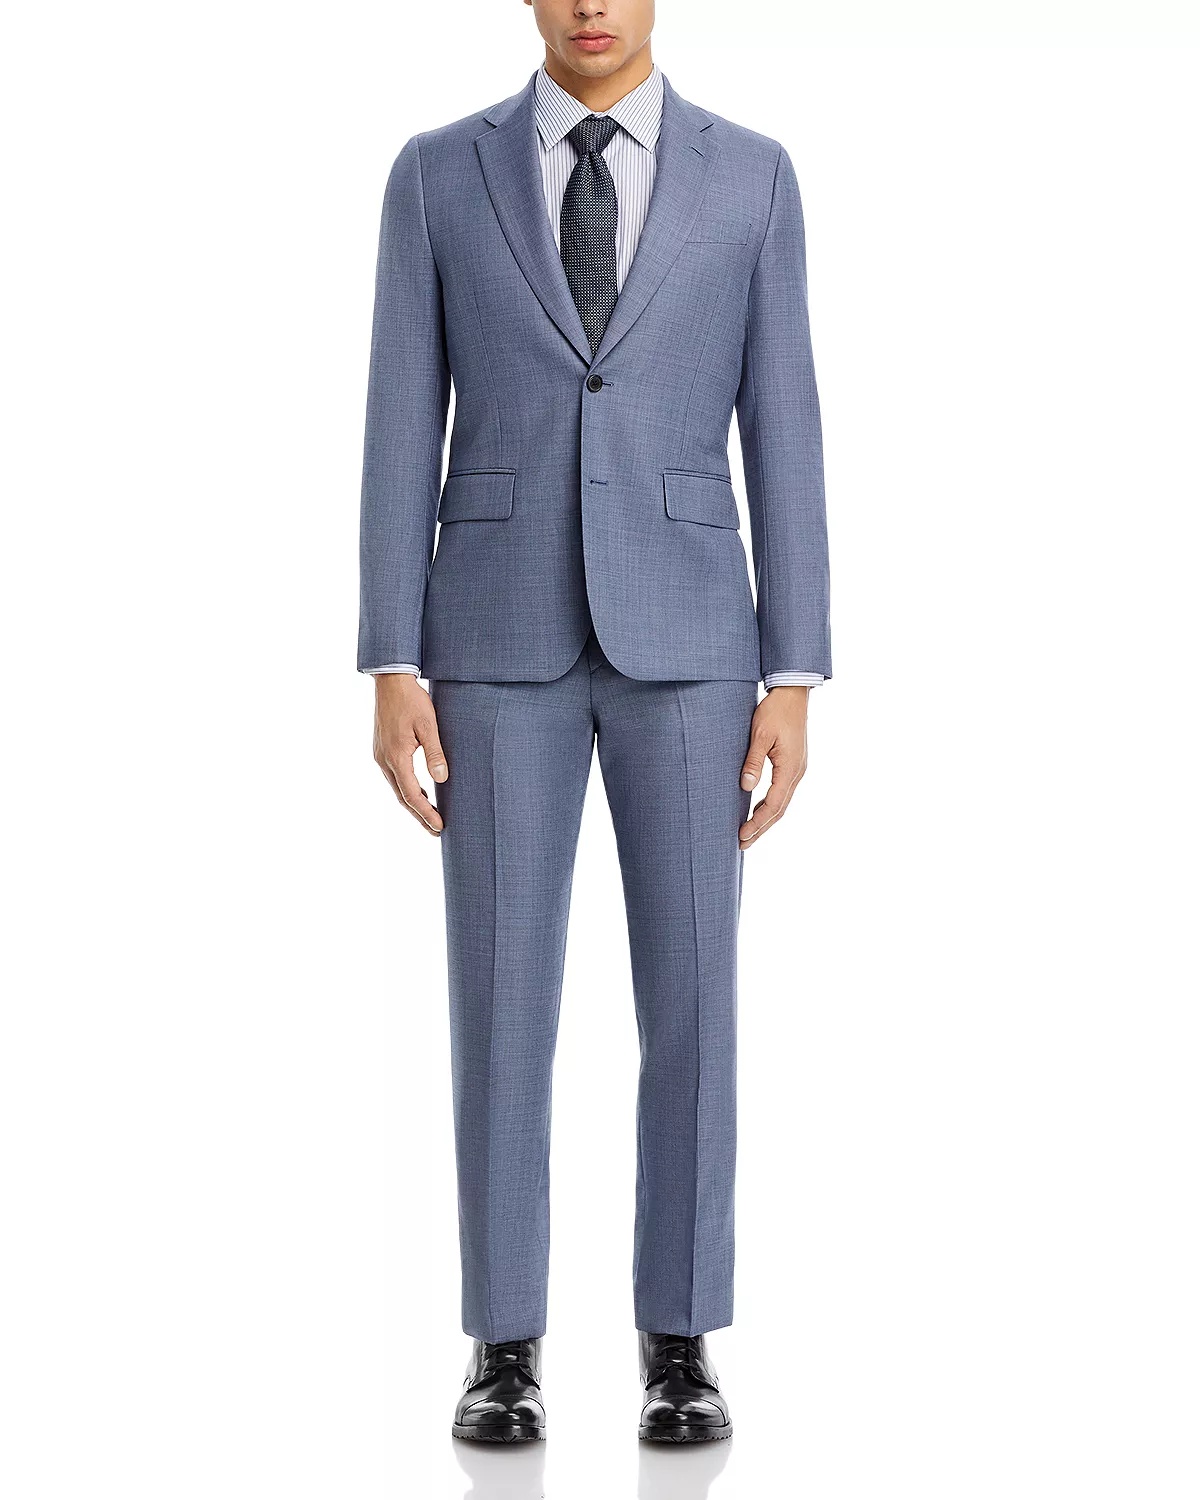 Brierly Sharkskin Tailored Fit Two Button Suit - 3